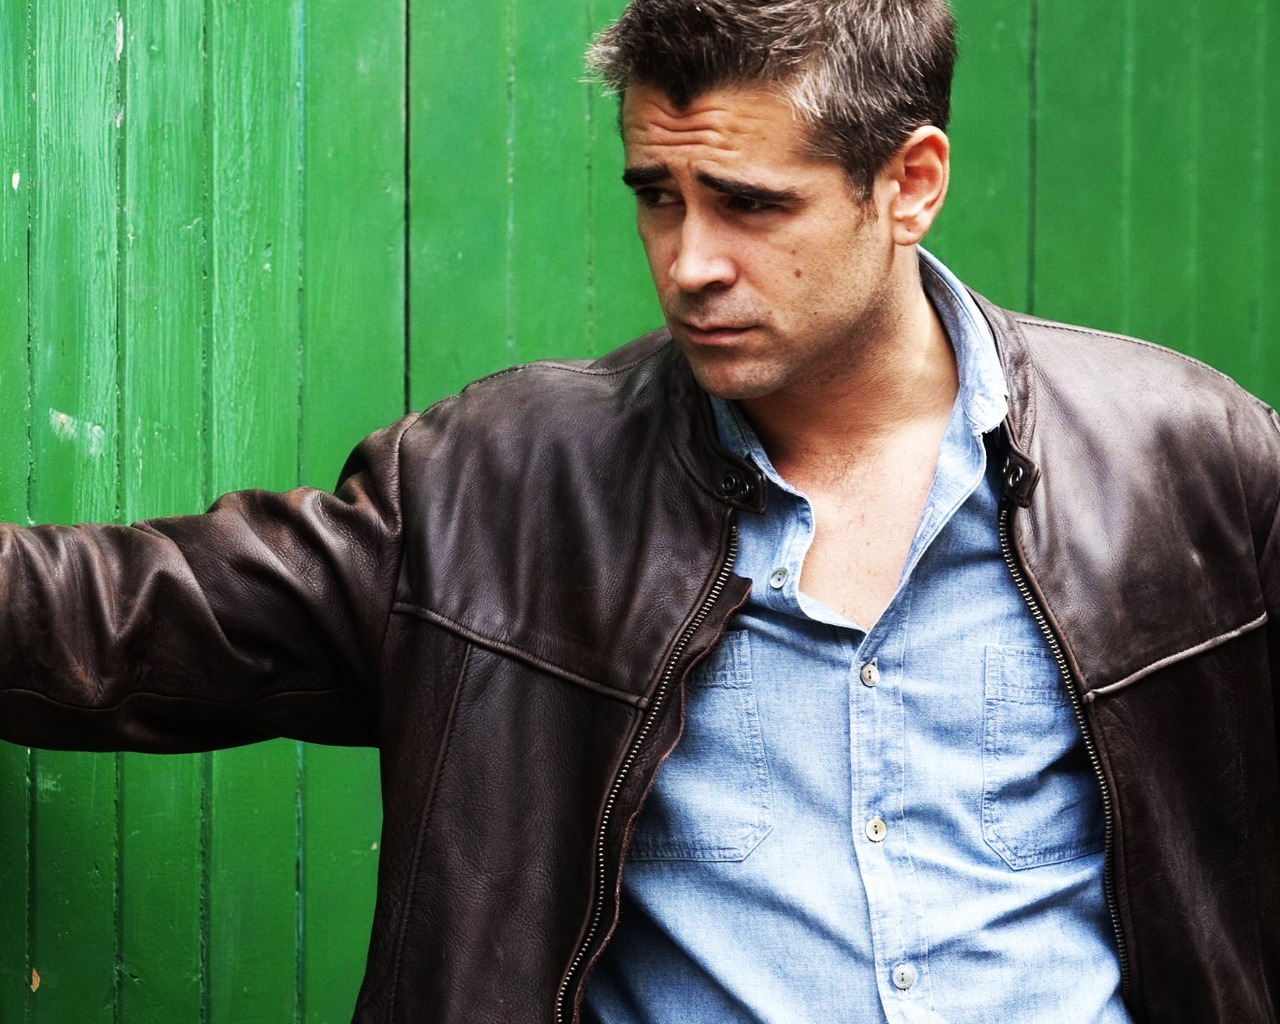 Colin Farrell Actor for 1280 x 1024 resolution